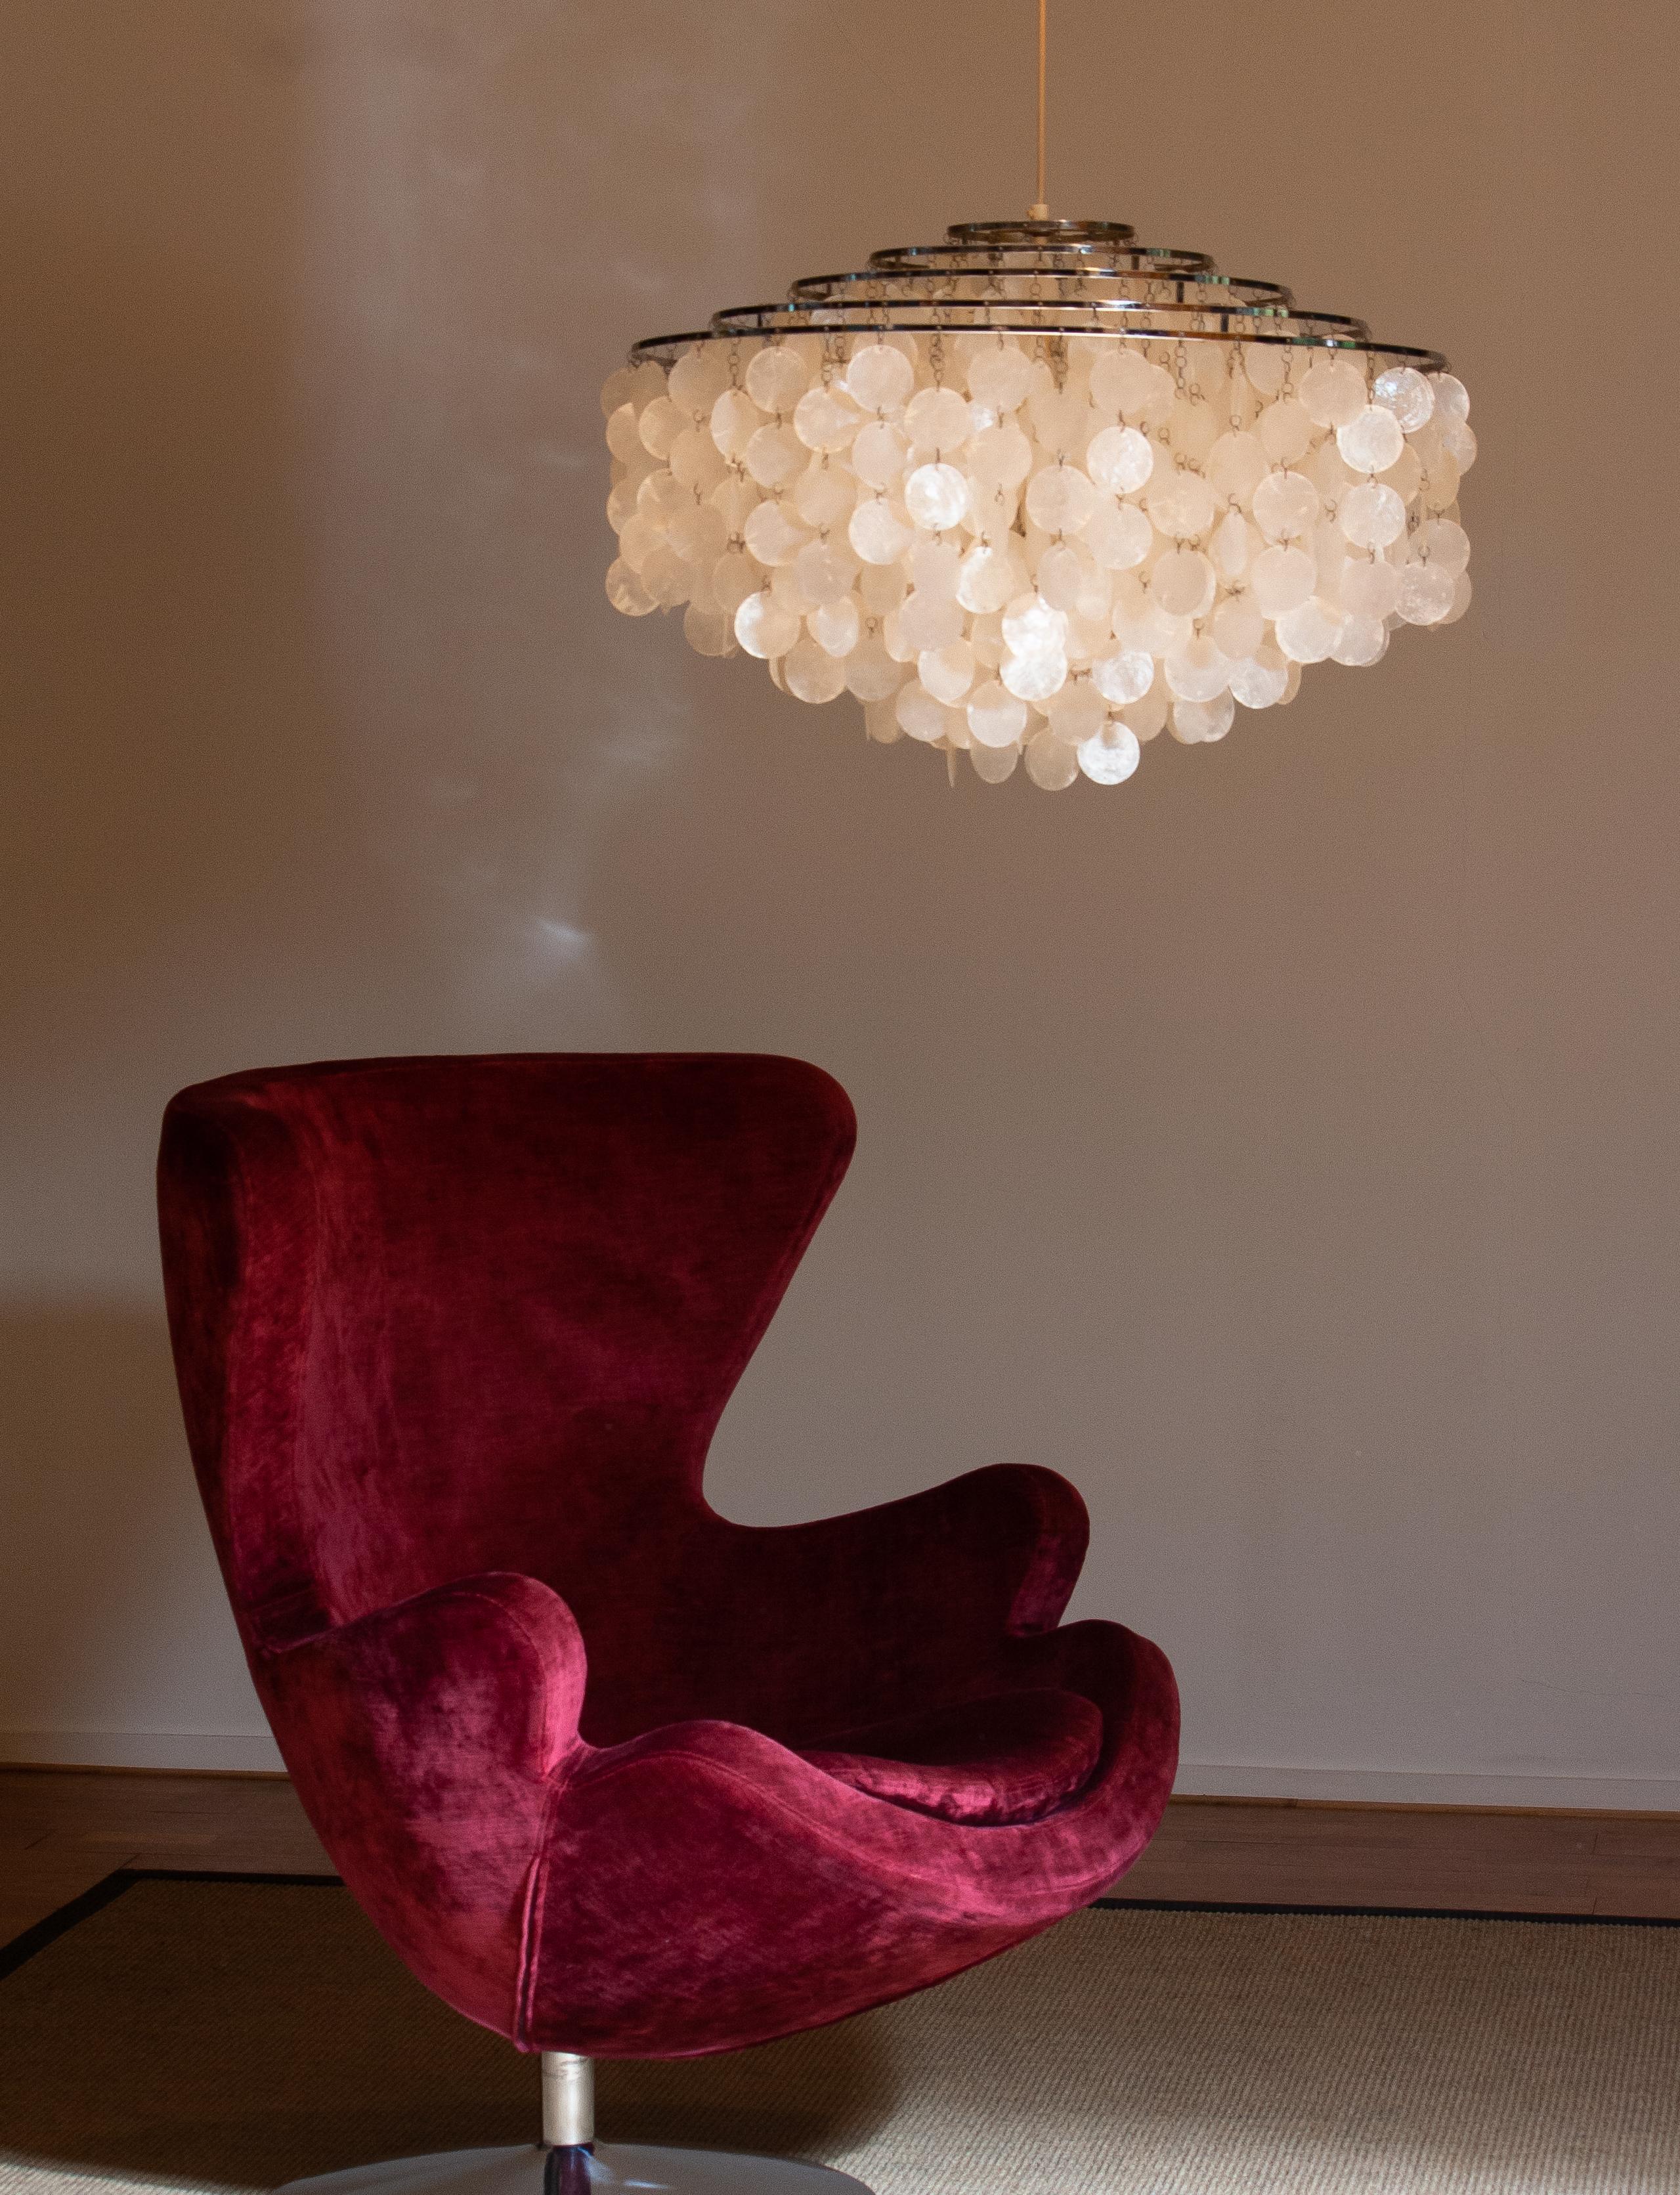 Pair of Extra Large Capiz Shell Chandeliers by Verner Panton for Luber AG. Swiss 6